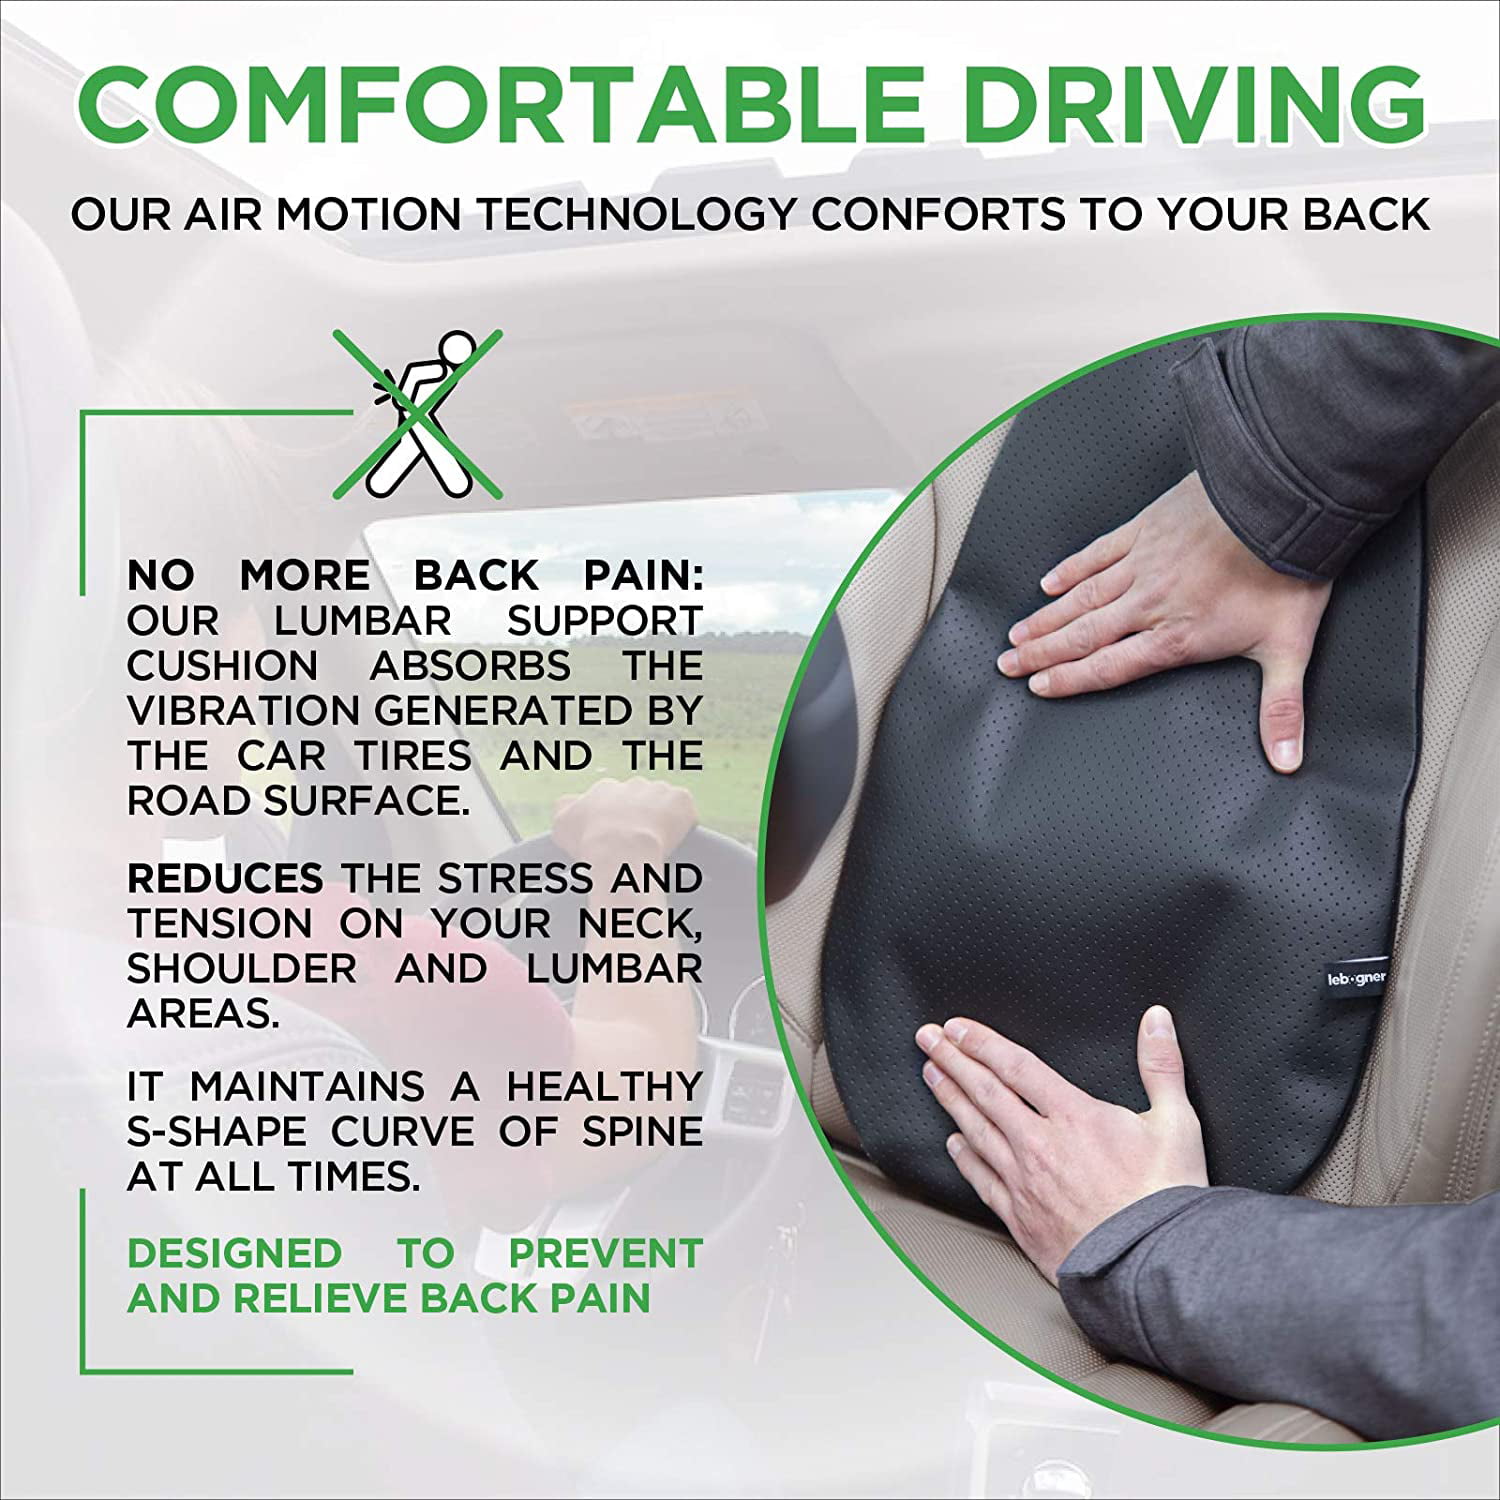 3 Reasons to Avoid Driving with Lumbar Support